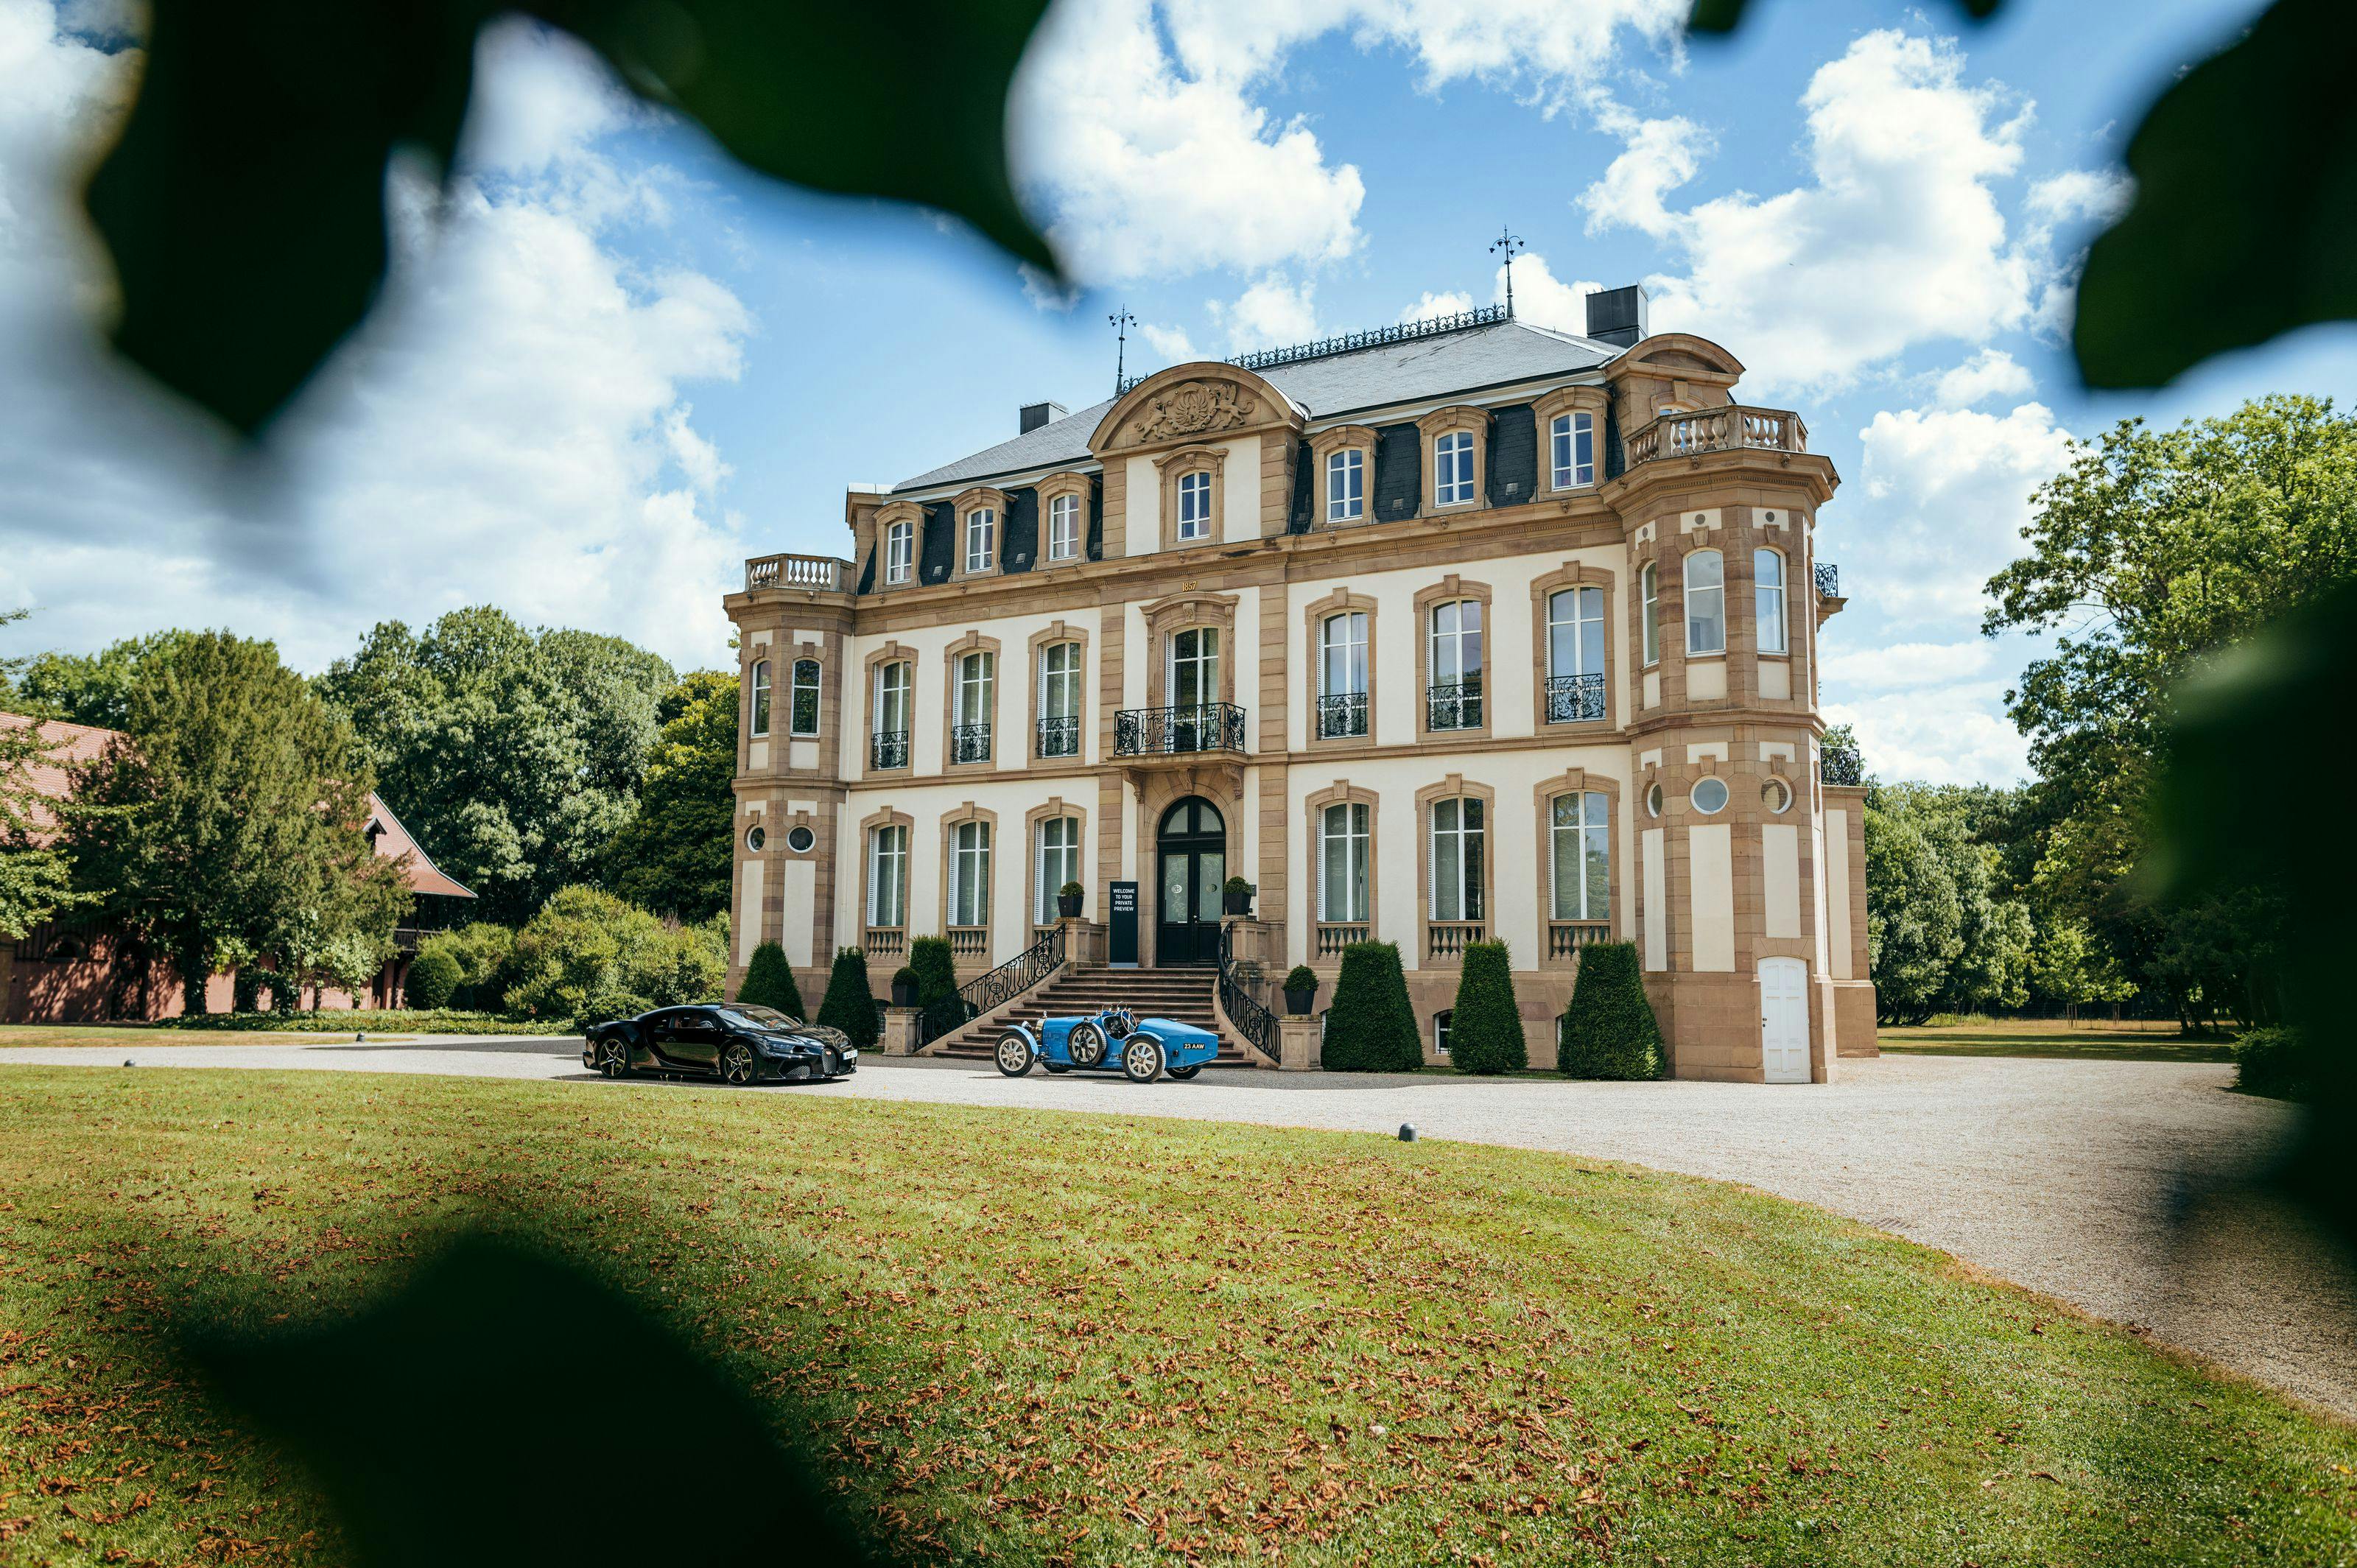 ‘One night at the Château’ brings unique access to the home of Bugatti